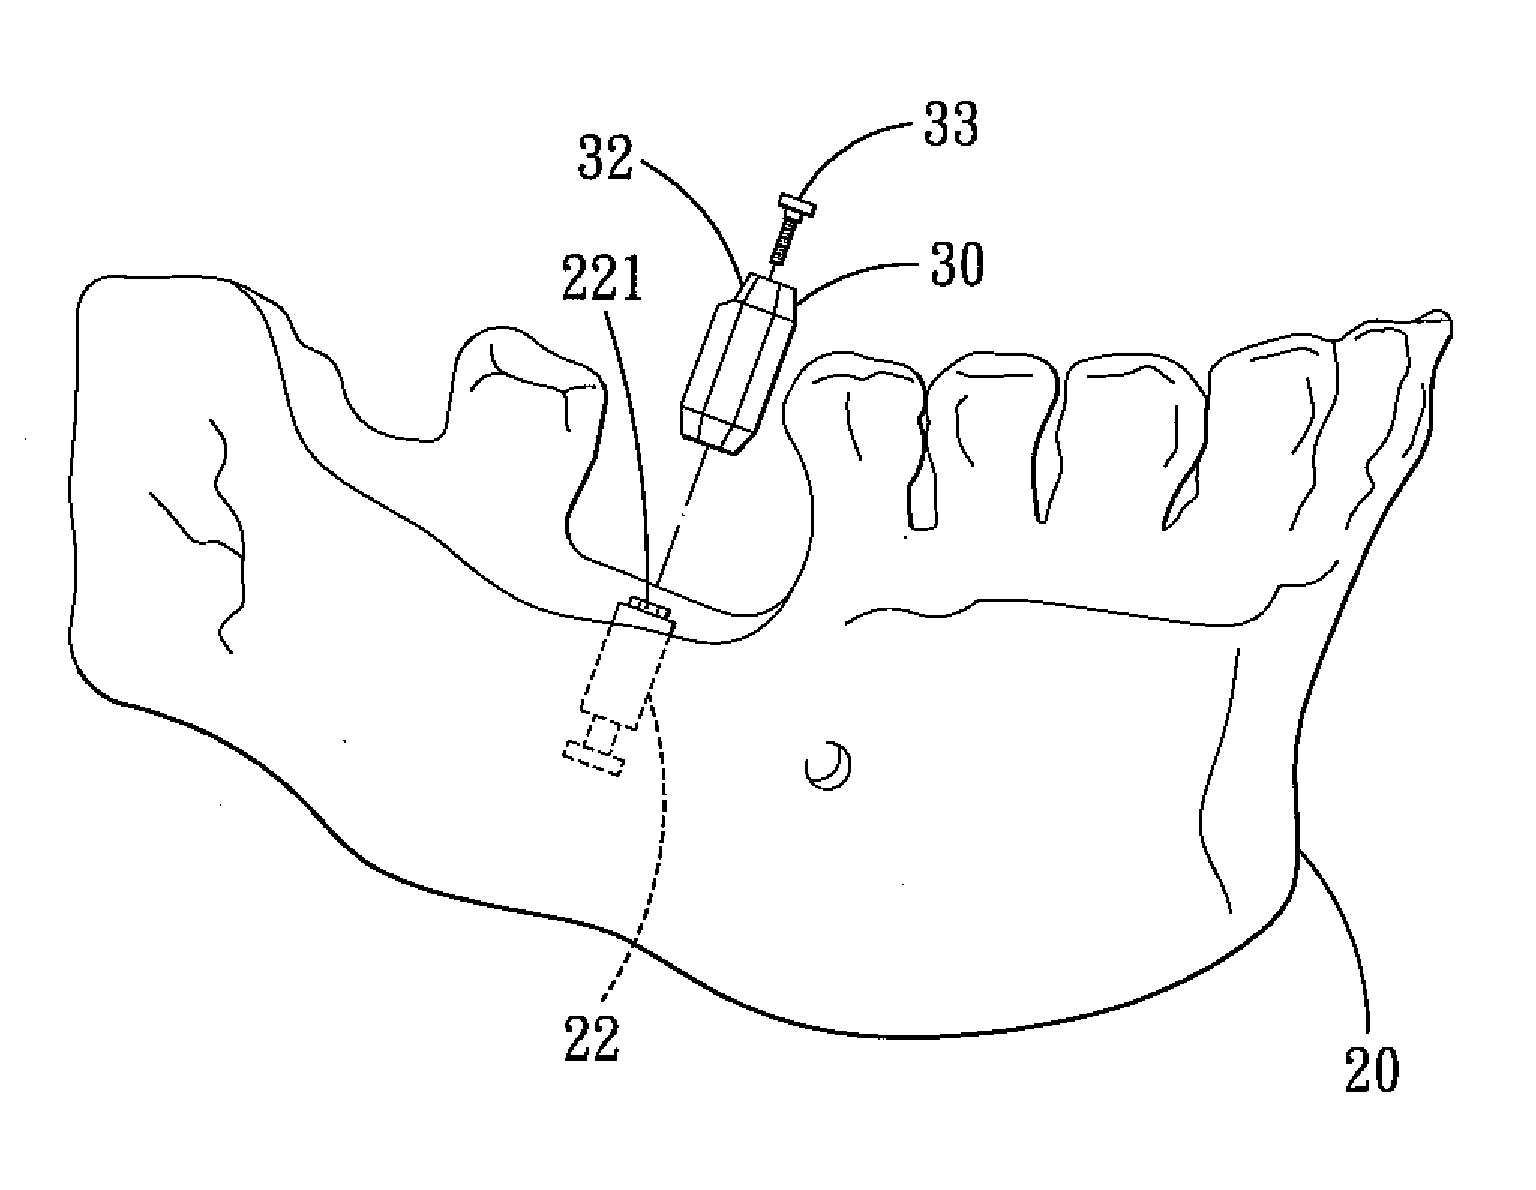 Method for Designing an Abutment